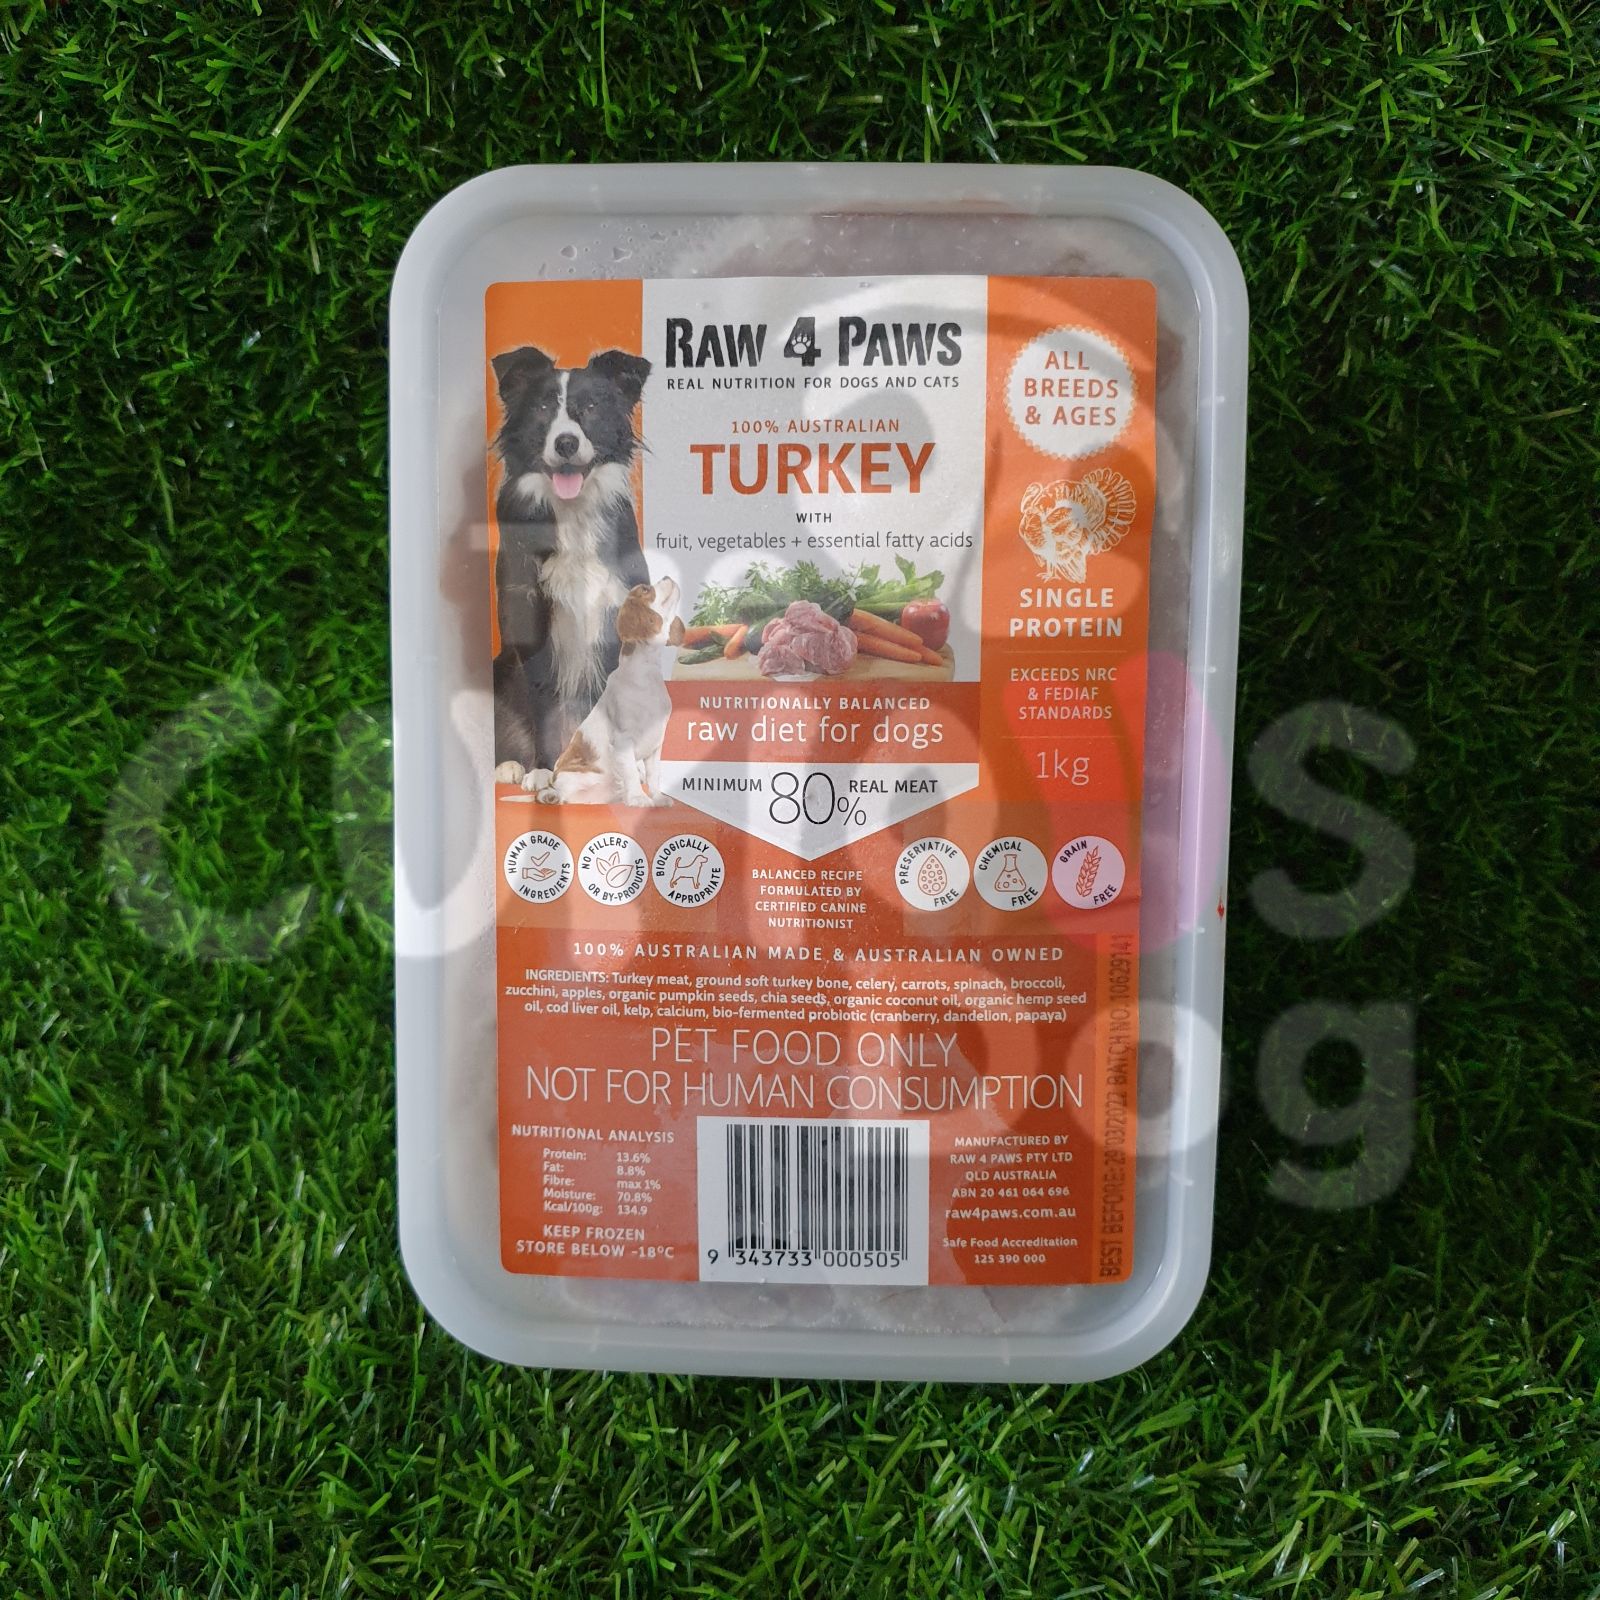 Turkey Container 1kg Raw 4 Paws Raw Health 4 Dogs